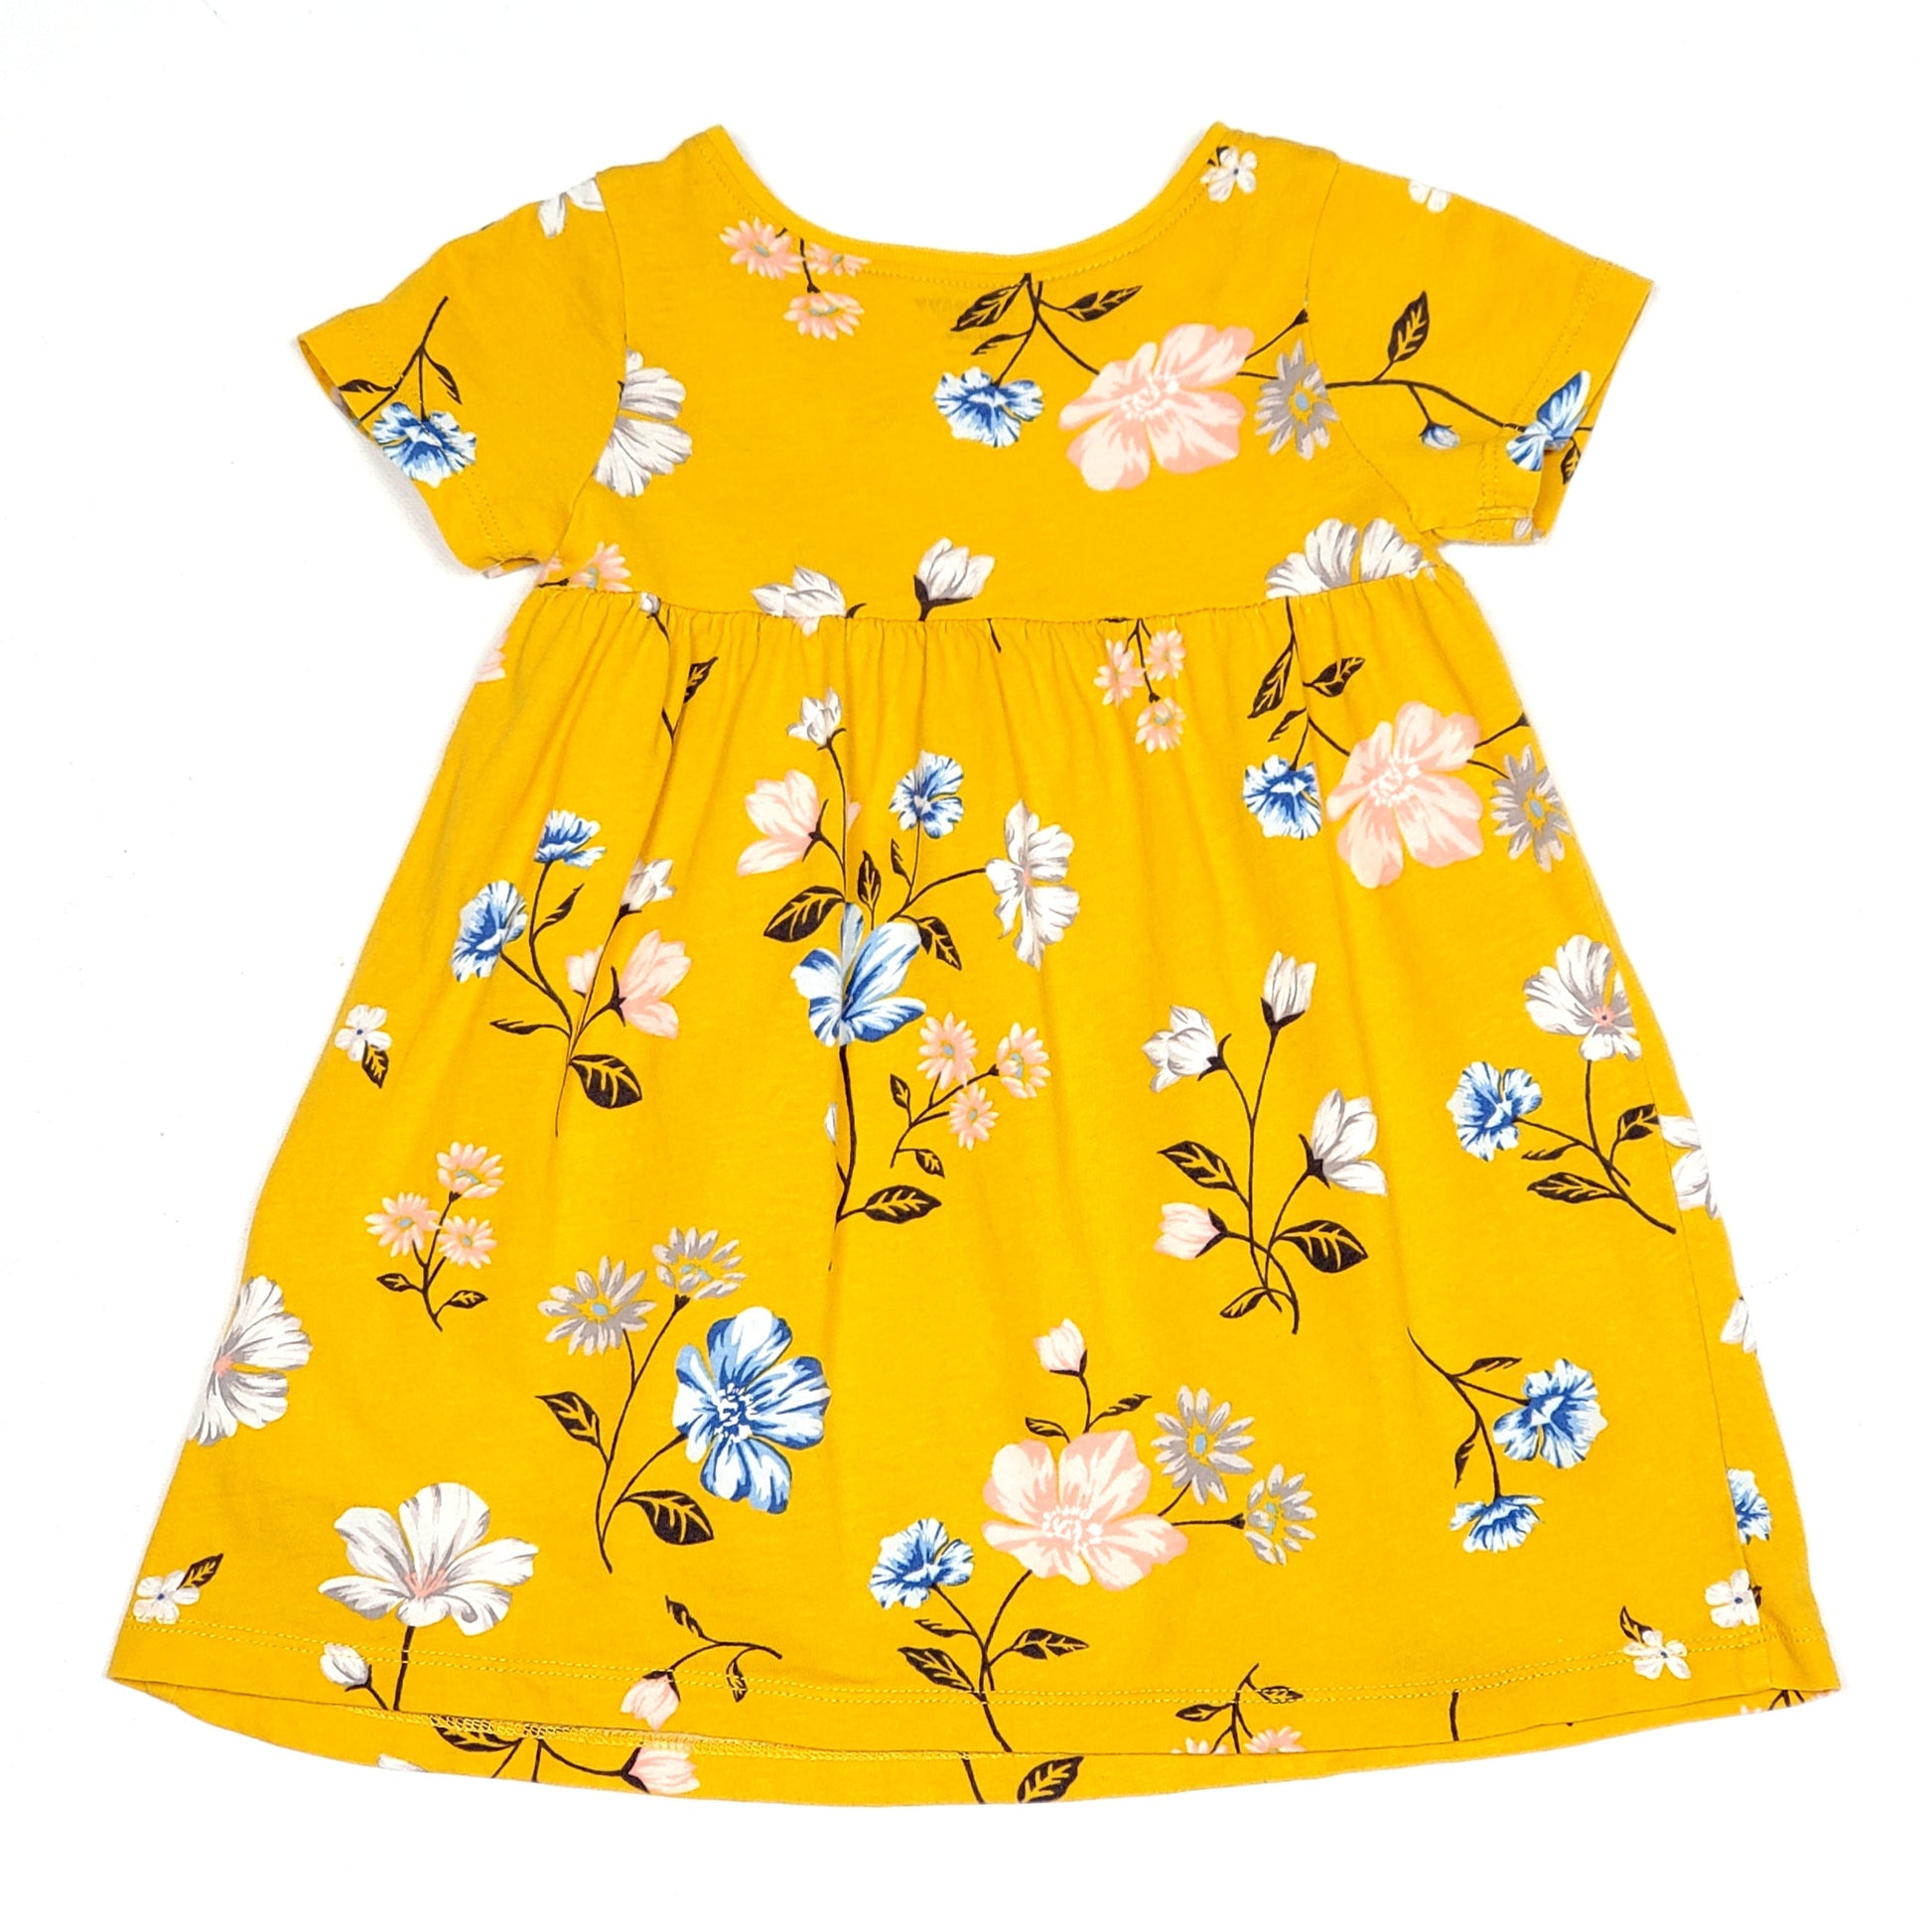 Old Navy Girls Yellow Floral Print Dress 12M Used View 2